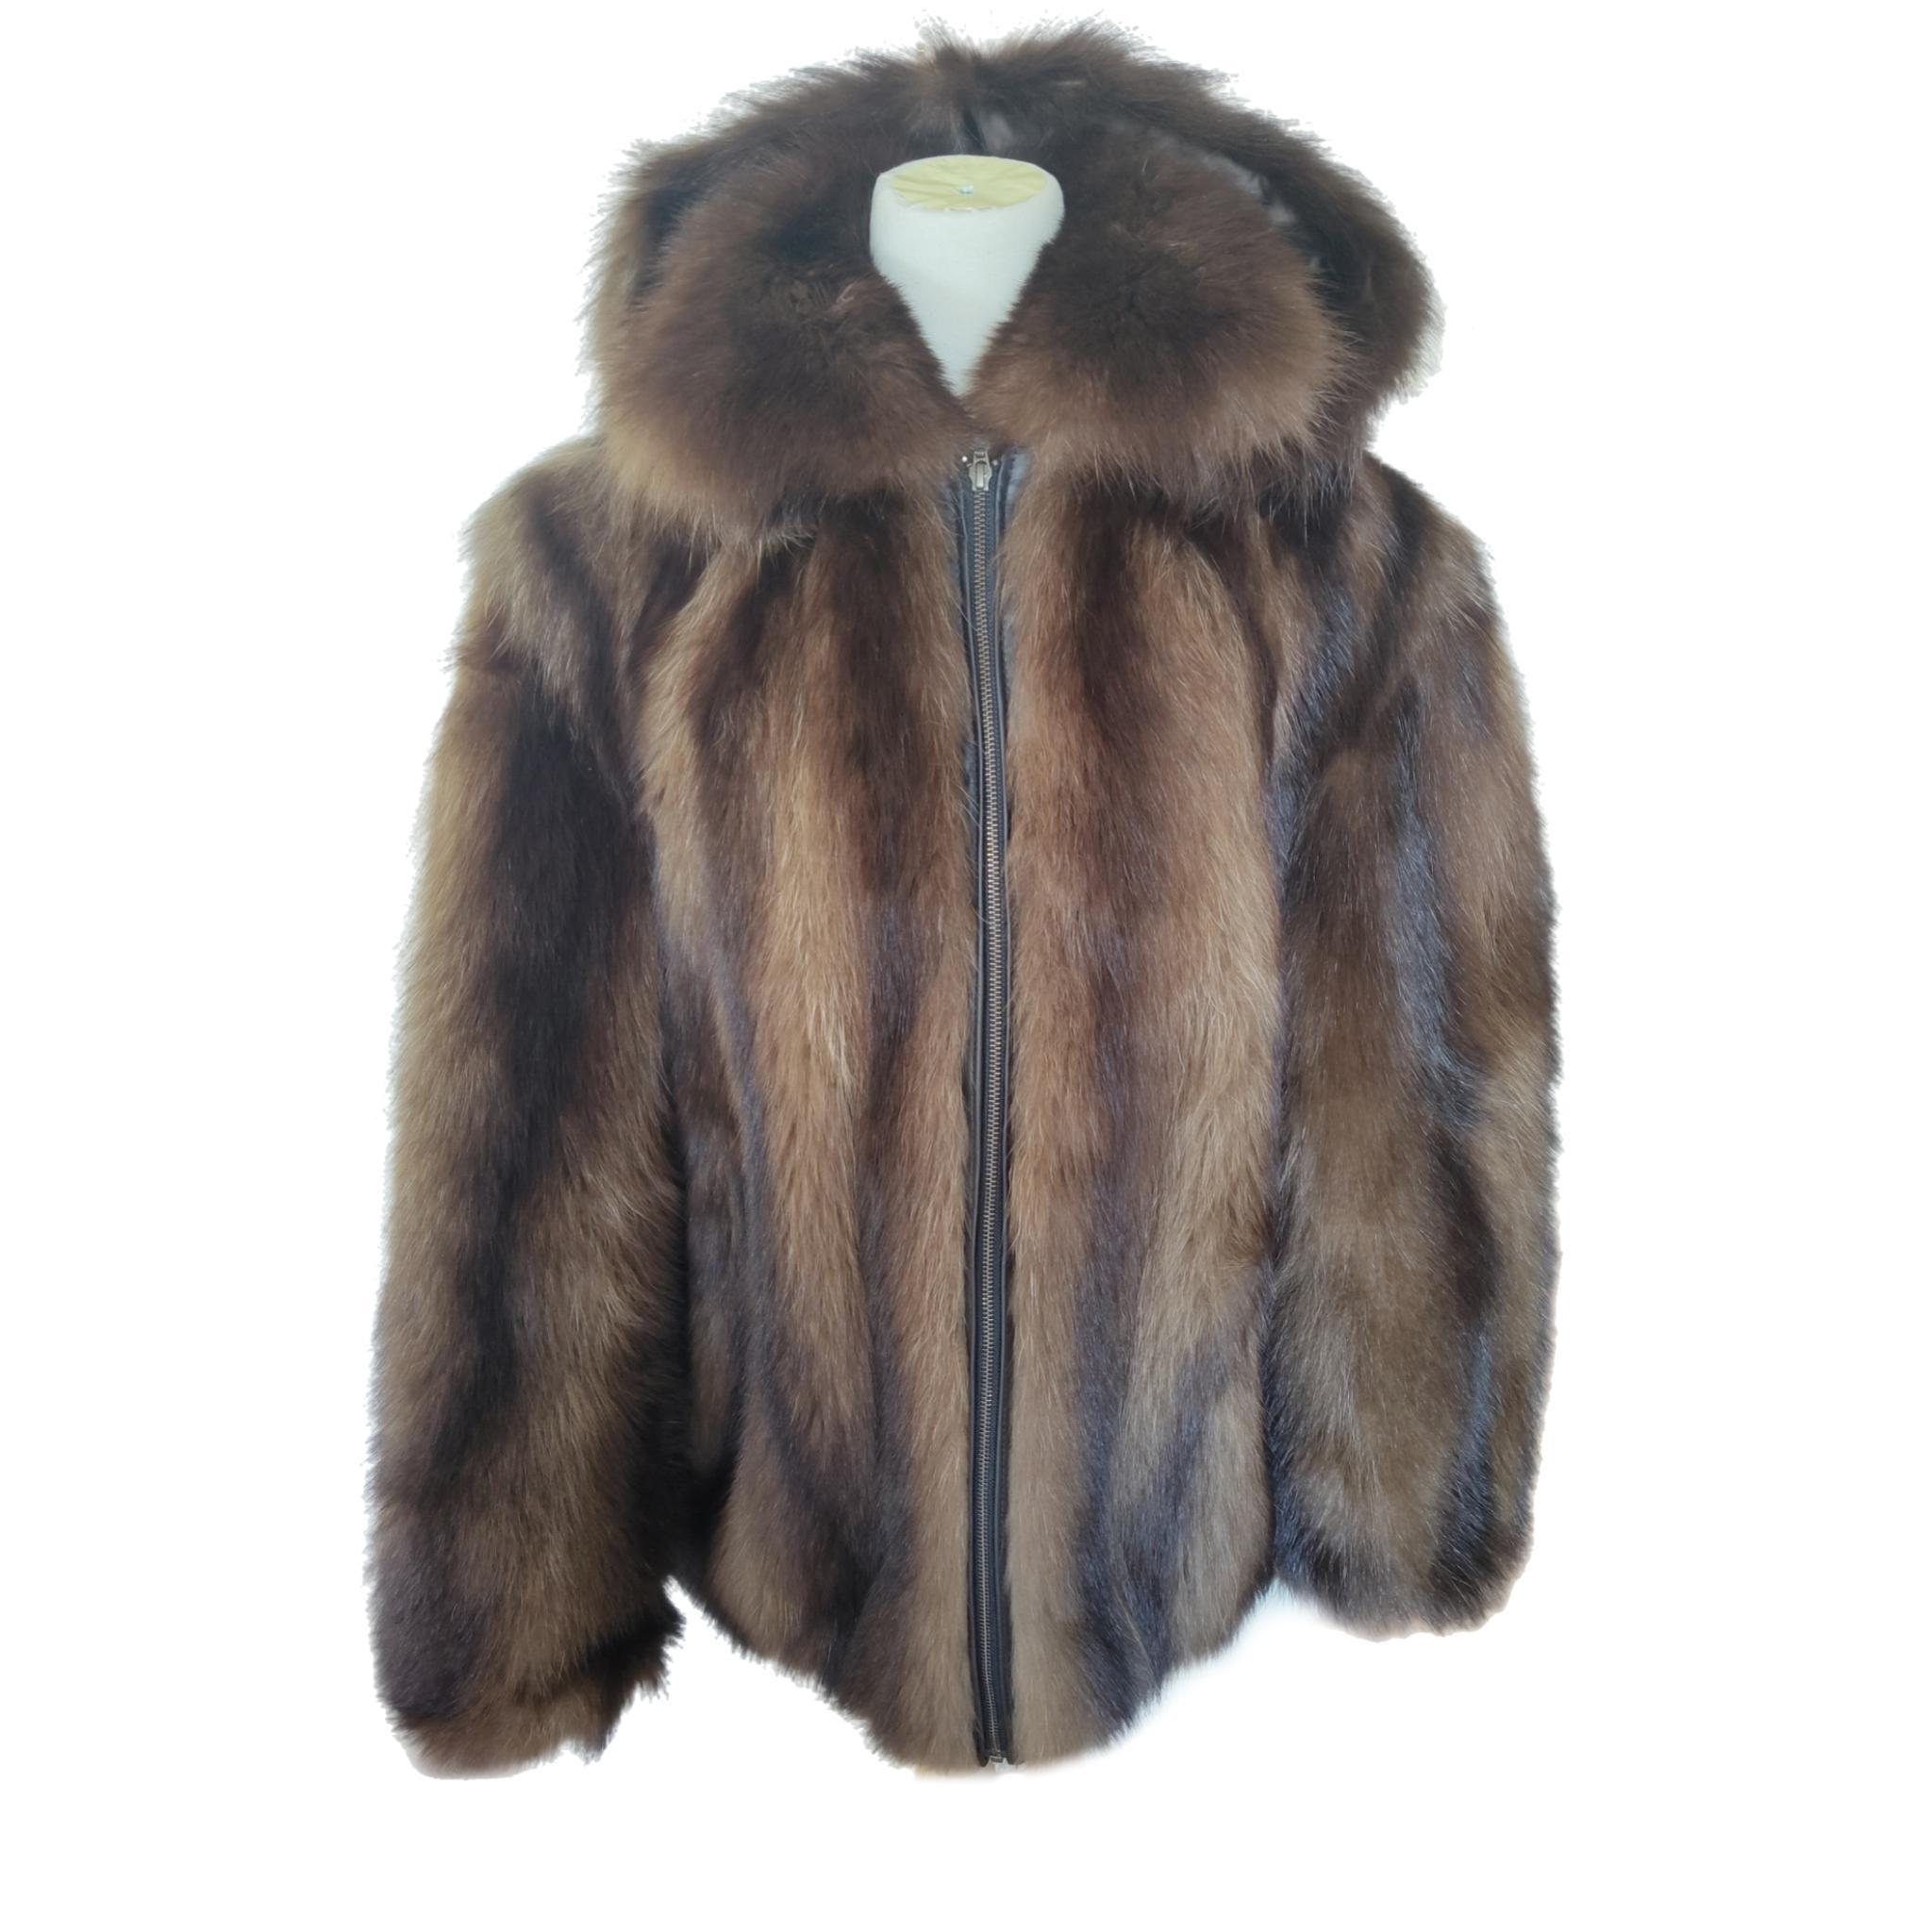 Wolverine fur Fur bomber Coat 44-46 men's L

beautiful ample short collar, big sleeves with elastics, leather zipper for closure and too slit pockets. High quality skins, Tan lining and finished perfectly. 

Made in Canada with the best quality